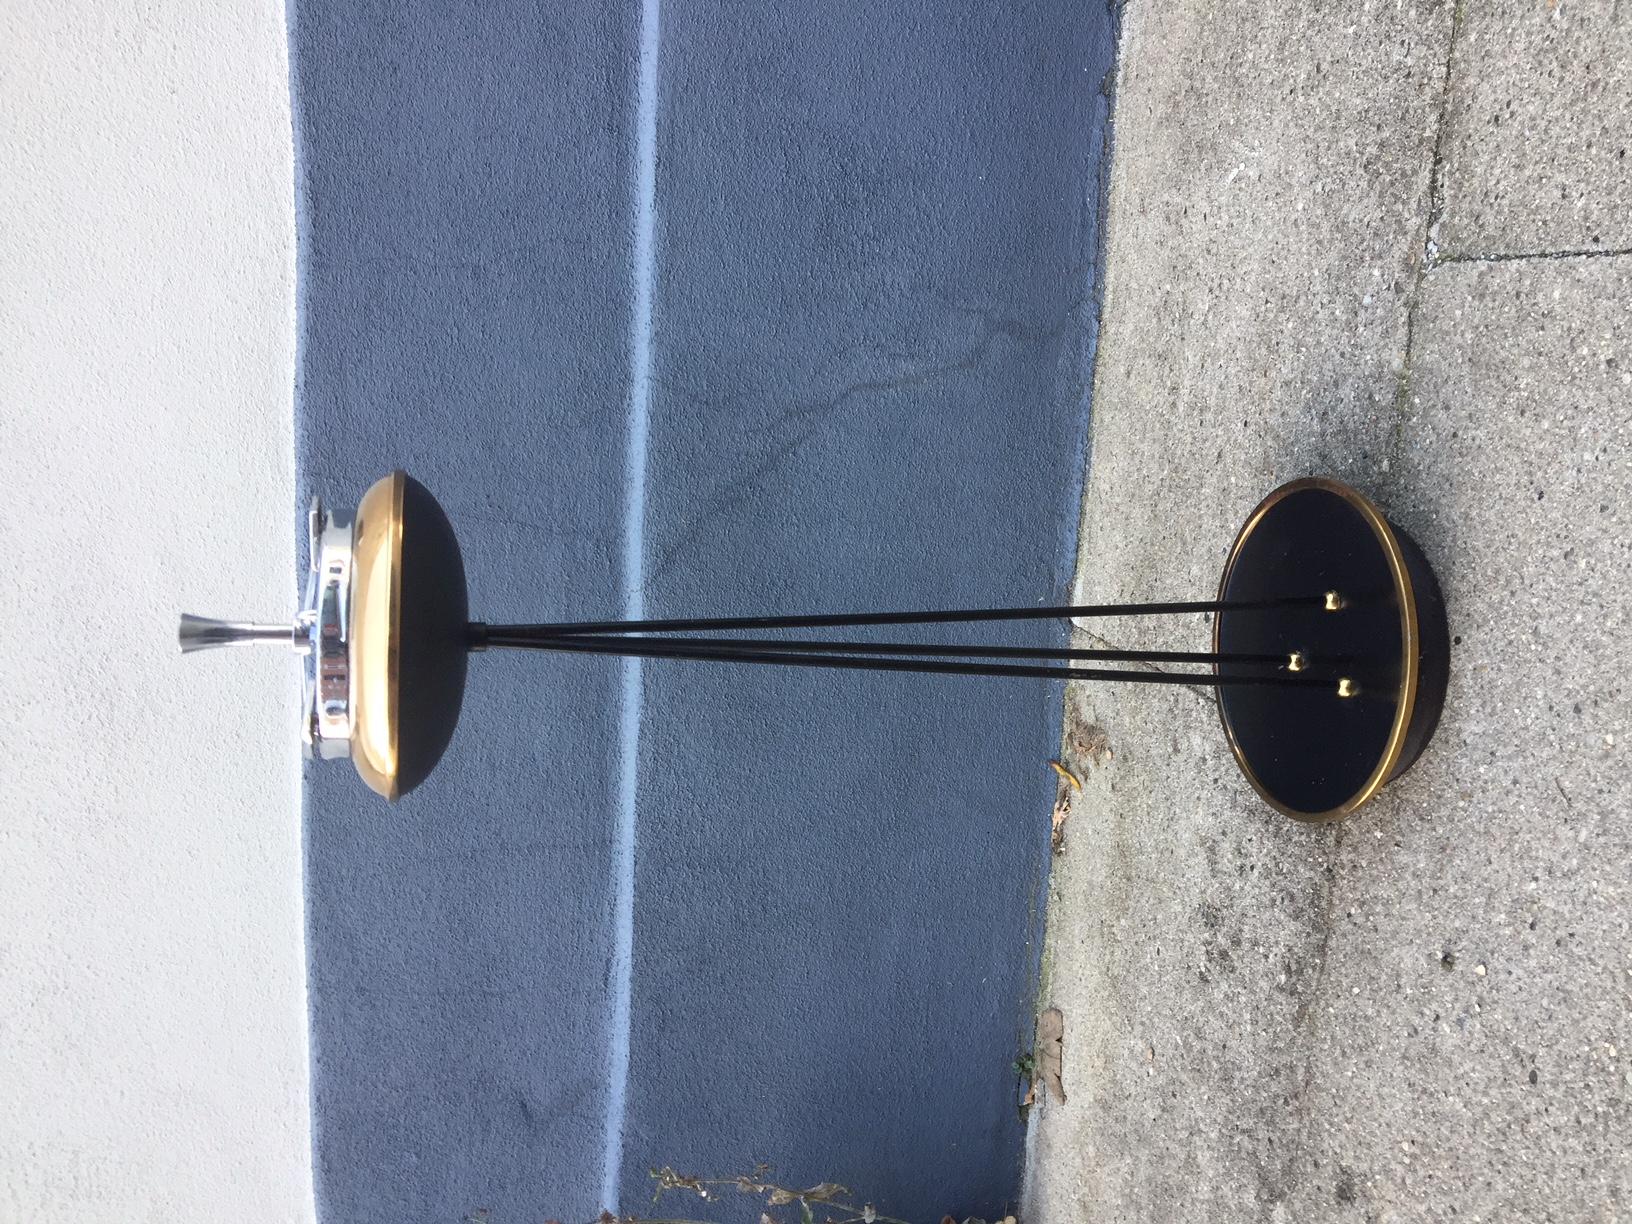 A decorative floor ashtray that resembles a UFO prior to landing. Its fashioned out of black painted iron and has brass detailing. The ashtray itself is easily removable and is made of stainless steel. It was manufactured in Germany during the early